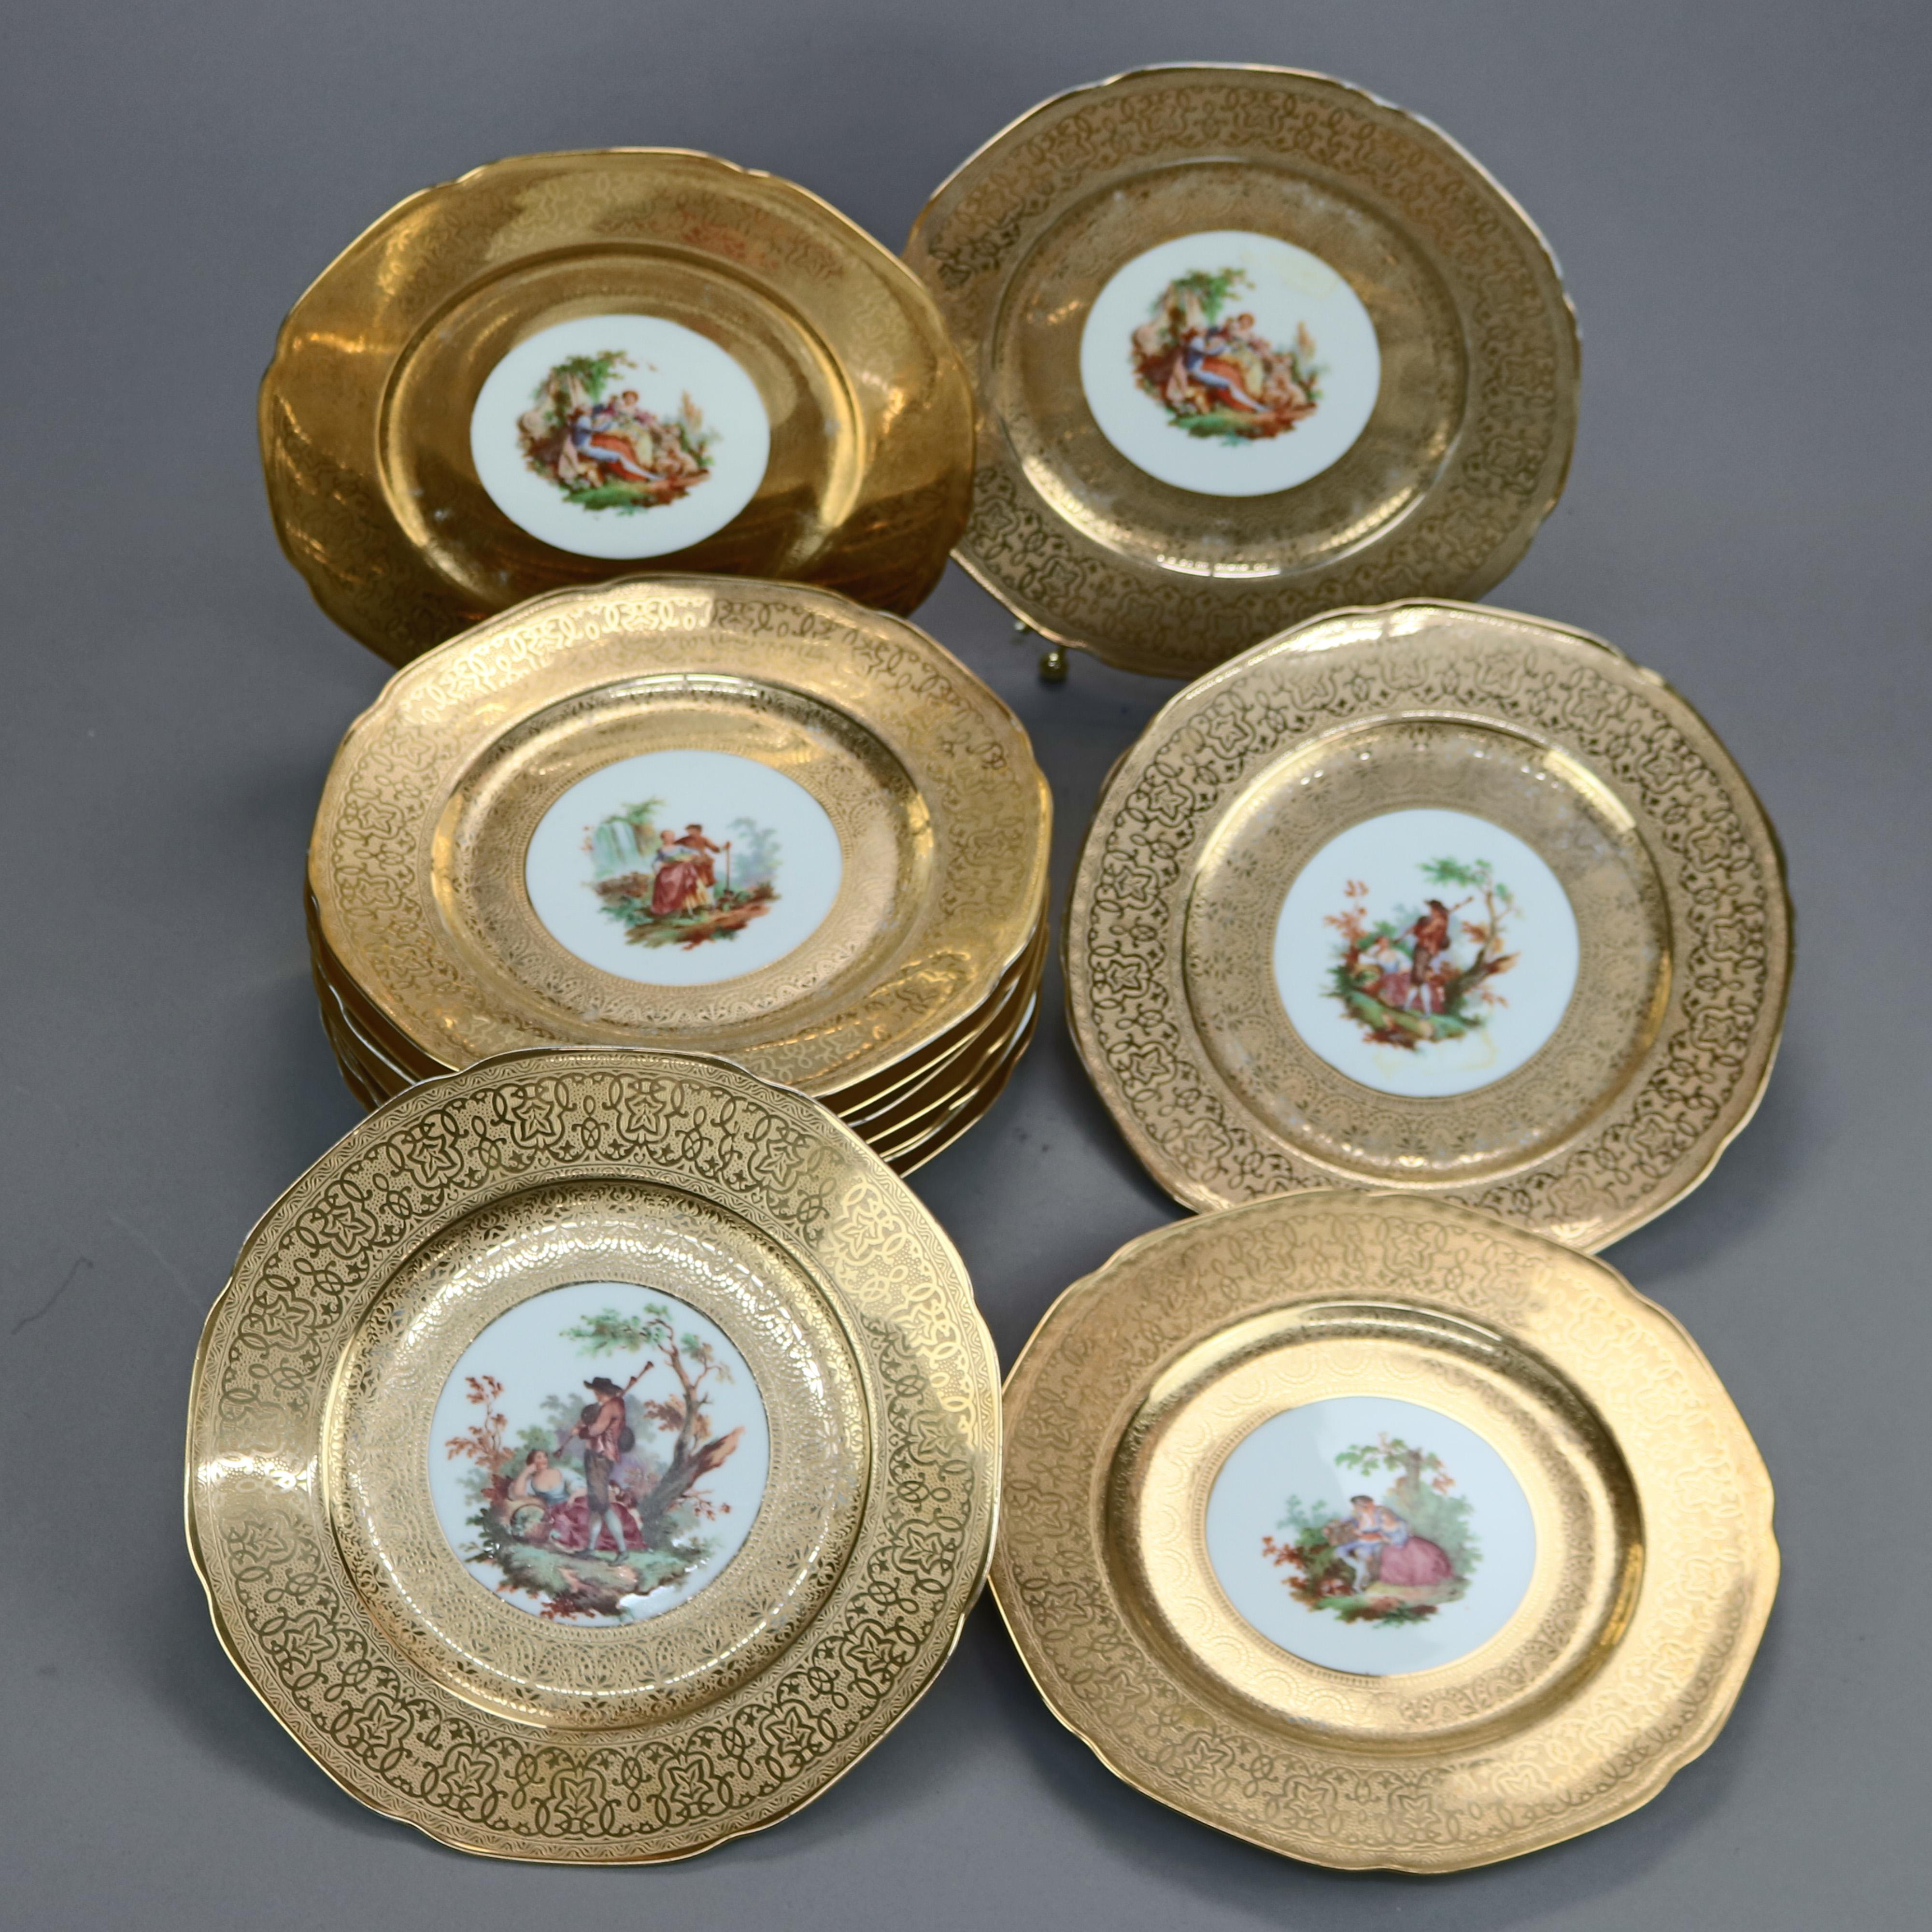 A set of 12 dinner plates by Royal Crown offer porcelain construction with gilt rims and genre courting scenes in wells, maker mark en verso as photographed, c1930

Measures - 1.25'' H x 10.25'' W x 10.25'' D.

Catalogue Note: Ask about DISCOUNTED